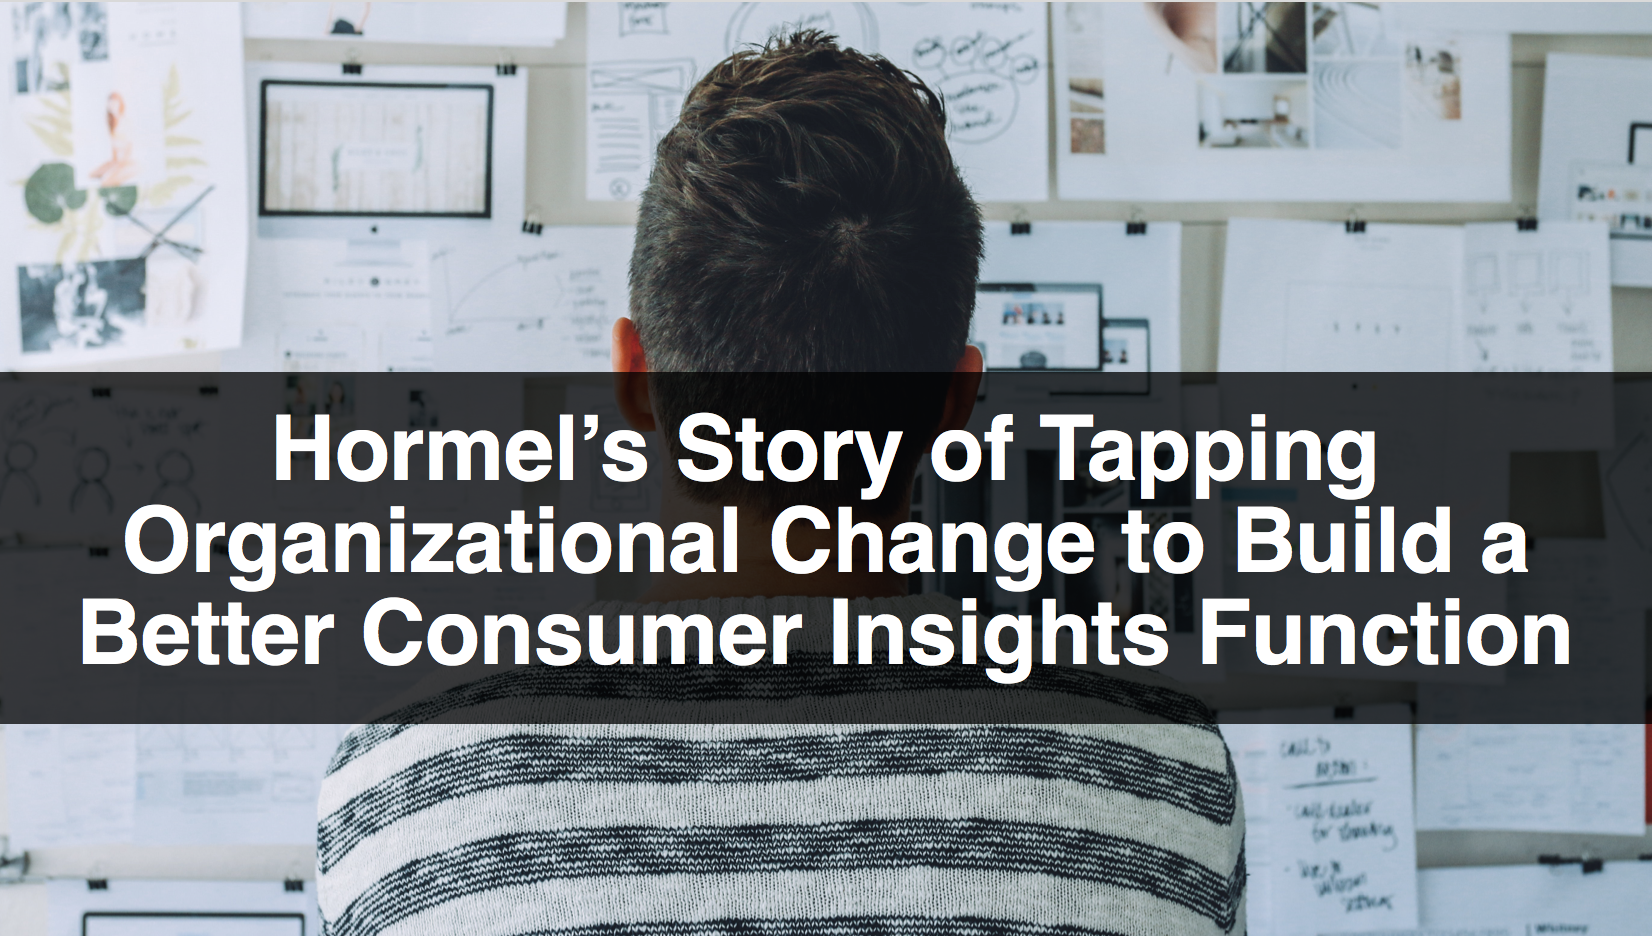 Hormel’s Story of Tapping Organizational Change to Build a Better Consumer Insights Function